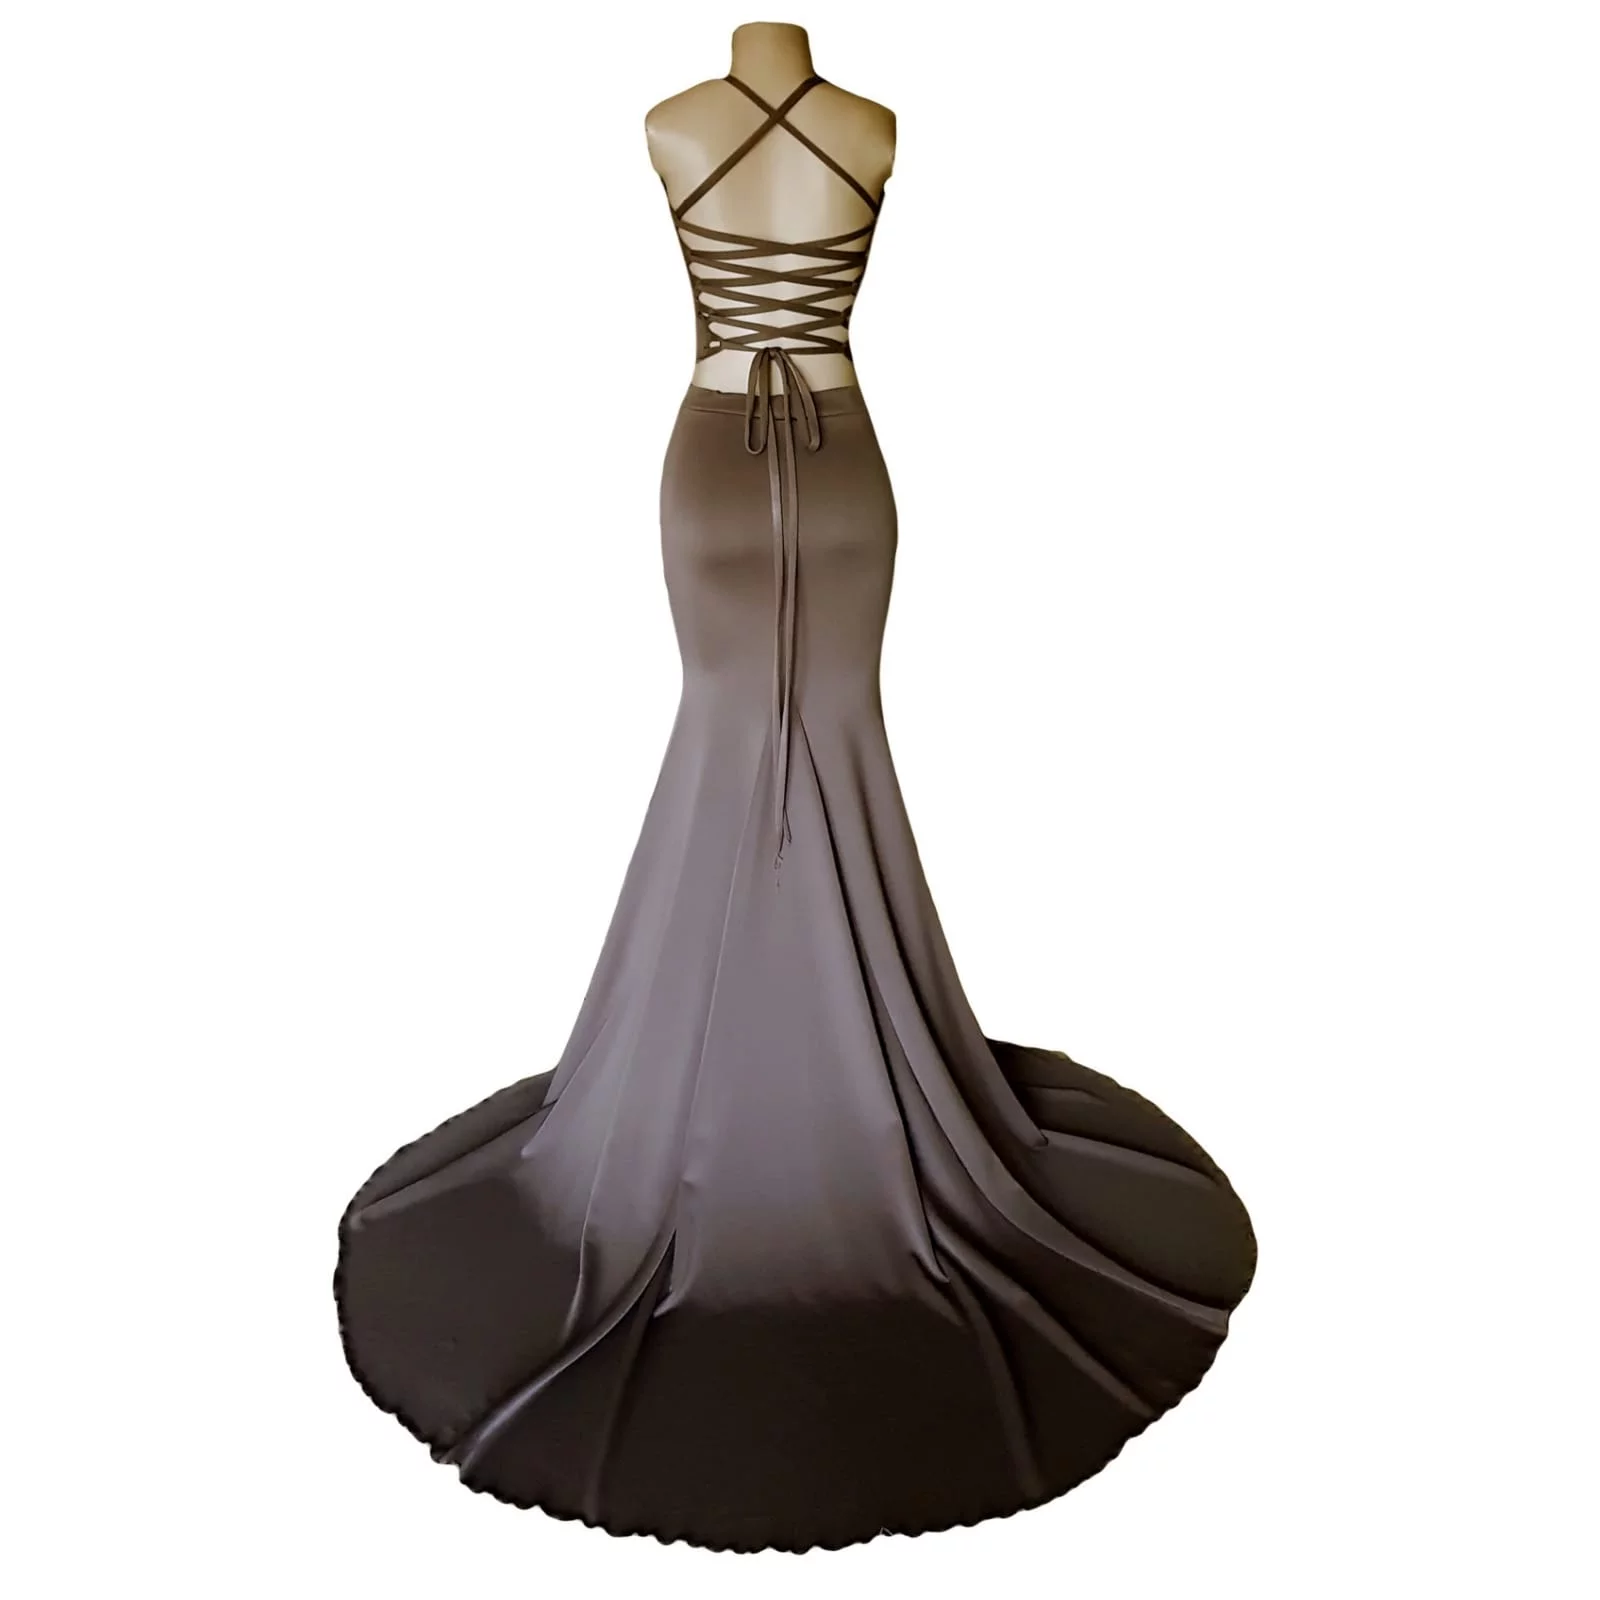 2 piece brown grey matric dance dress 4 2 piece brown grey matric dance dress. Skirt as a soft mermaid. Top with an open lace up back. Bust detailed with sequins. With a long train.